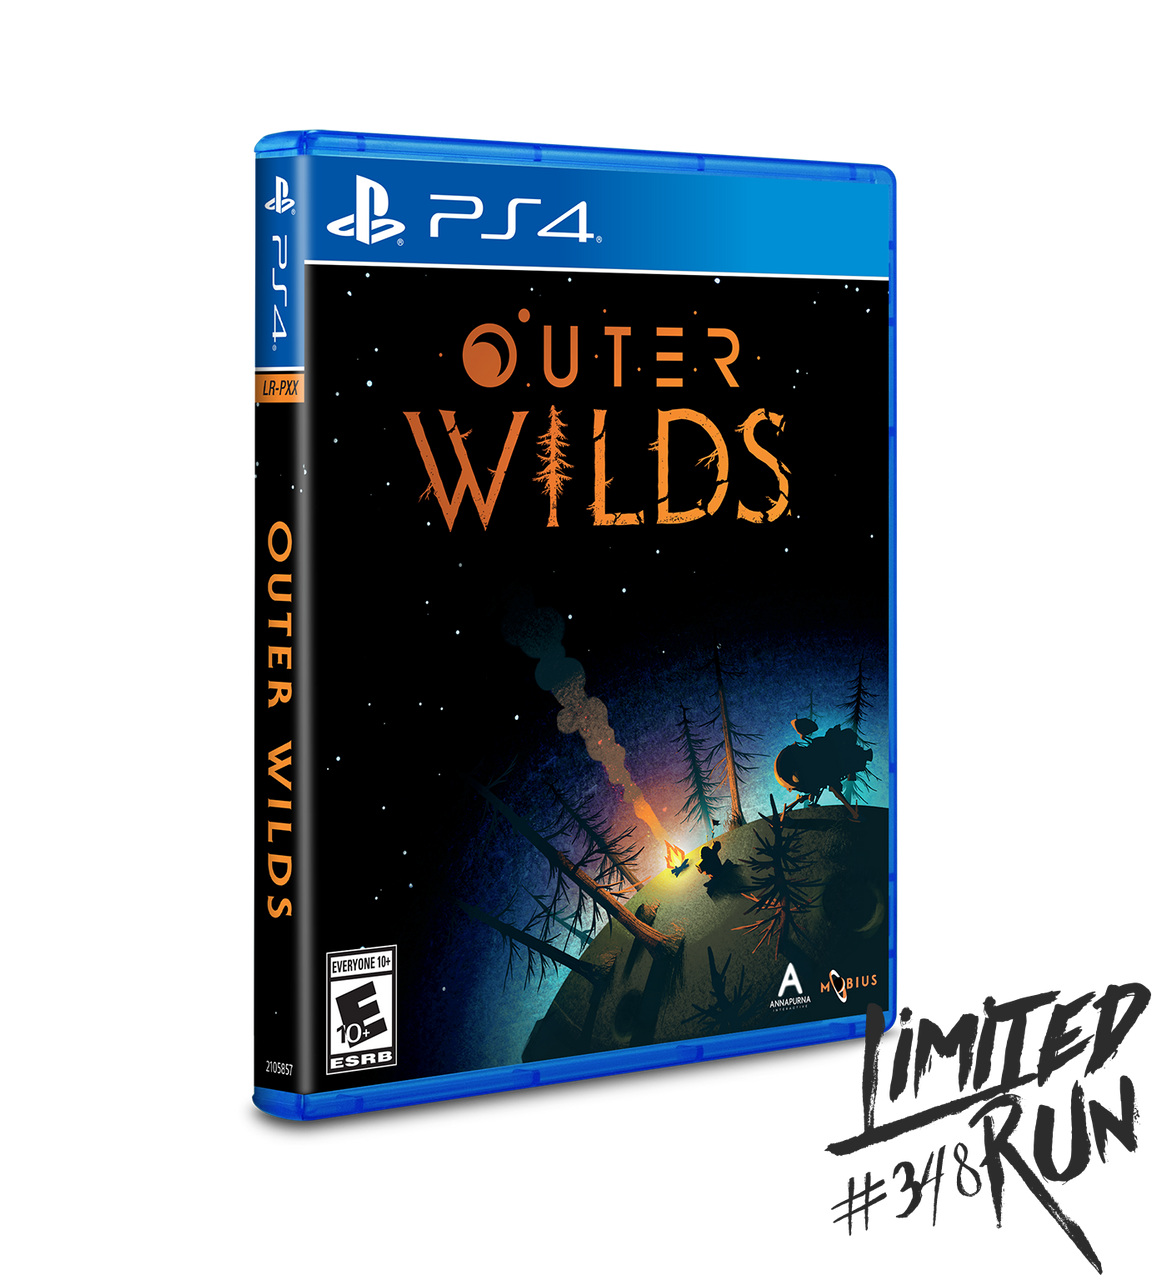 Outer Wilds Mods - Find the best mods for Outer Wilds - Full list